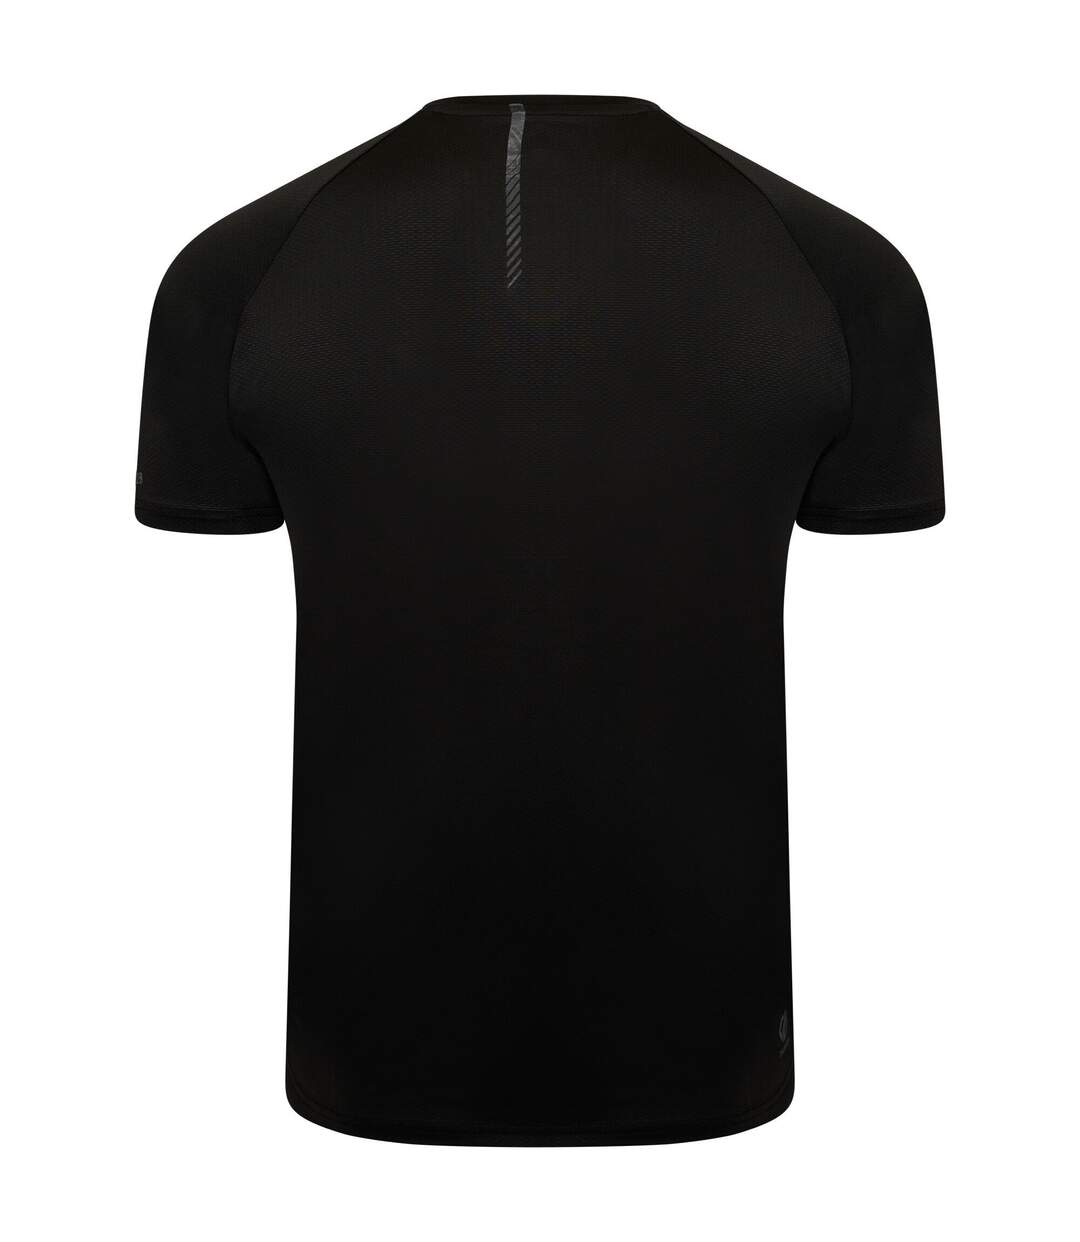 Dare 2B Mens Righteous II Mountain Recycled T-Shirt (Black) - UTRG7563